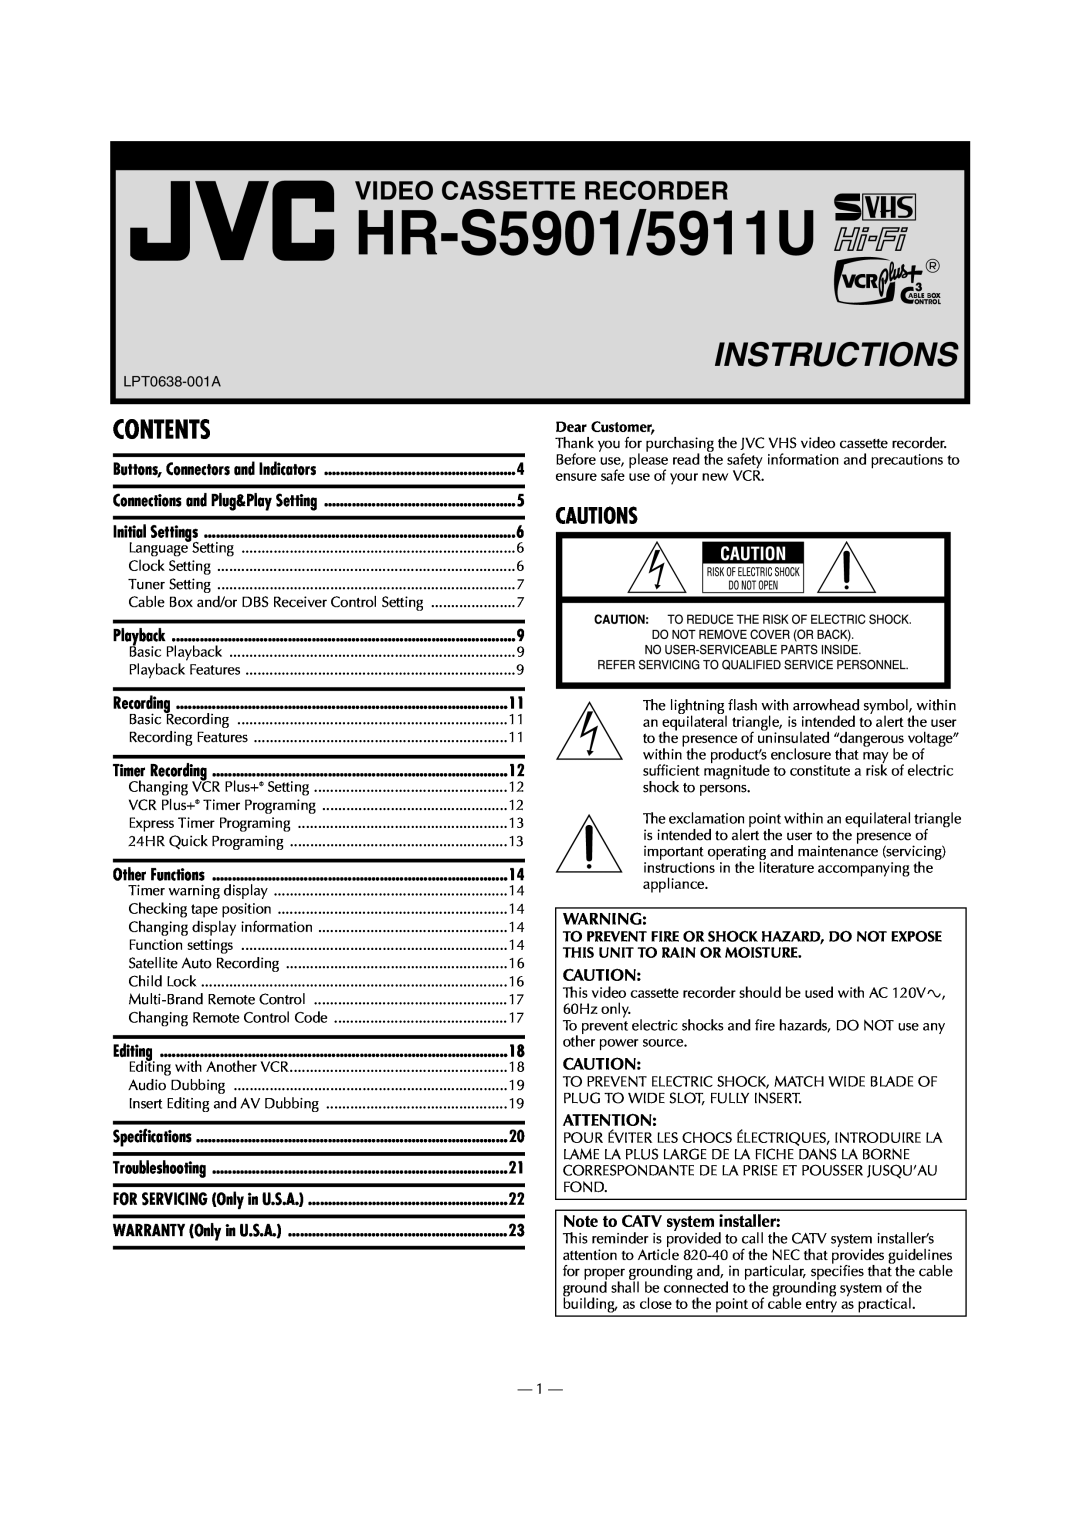 JVC HR-5911U specifications Video Cassette Recorder, Contents, Cautions, Note to CATV system installer, HR-S5901/5911U 